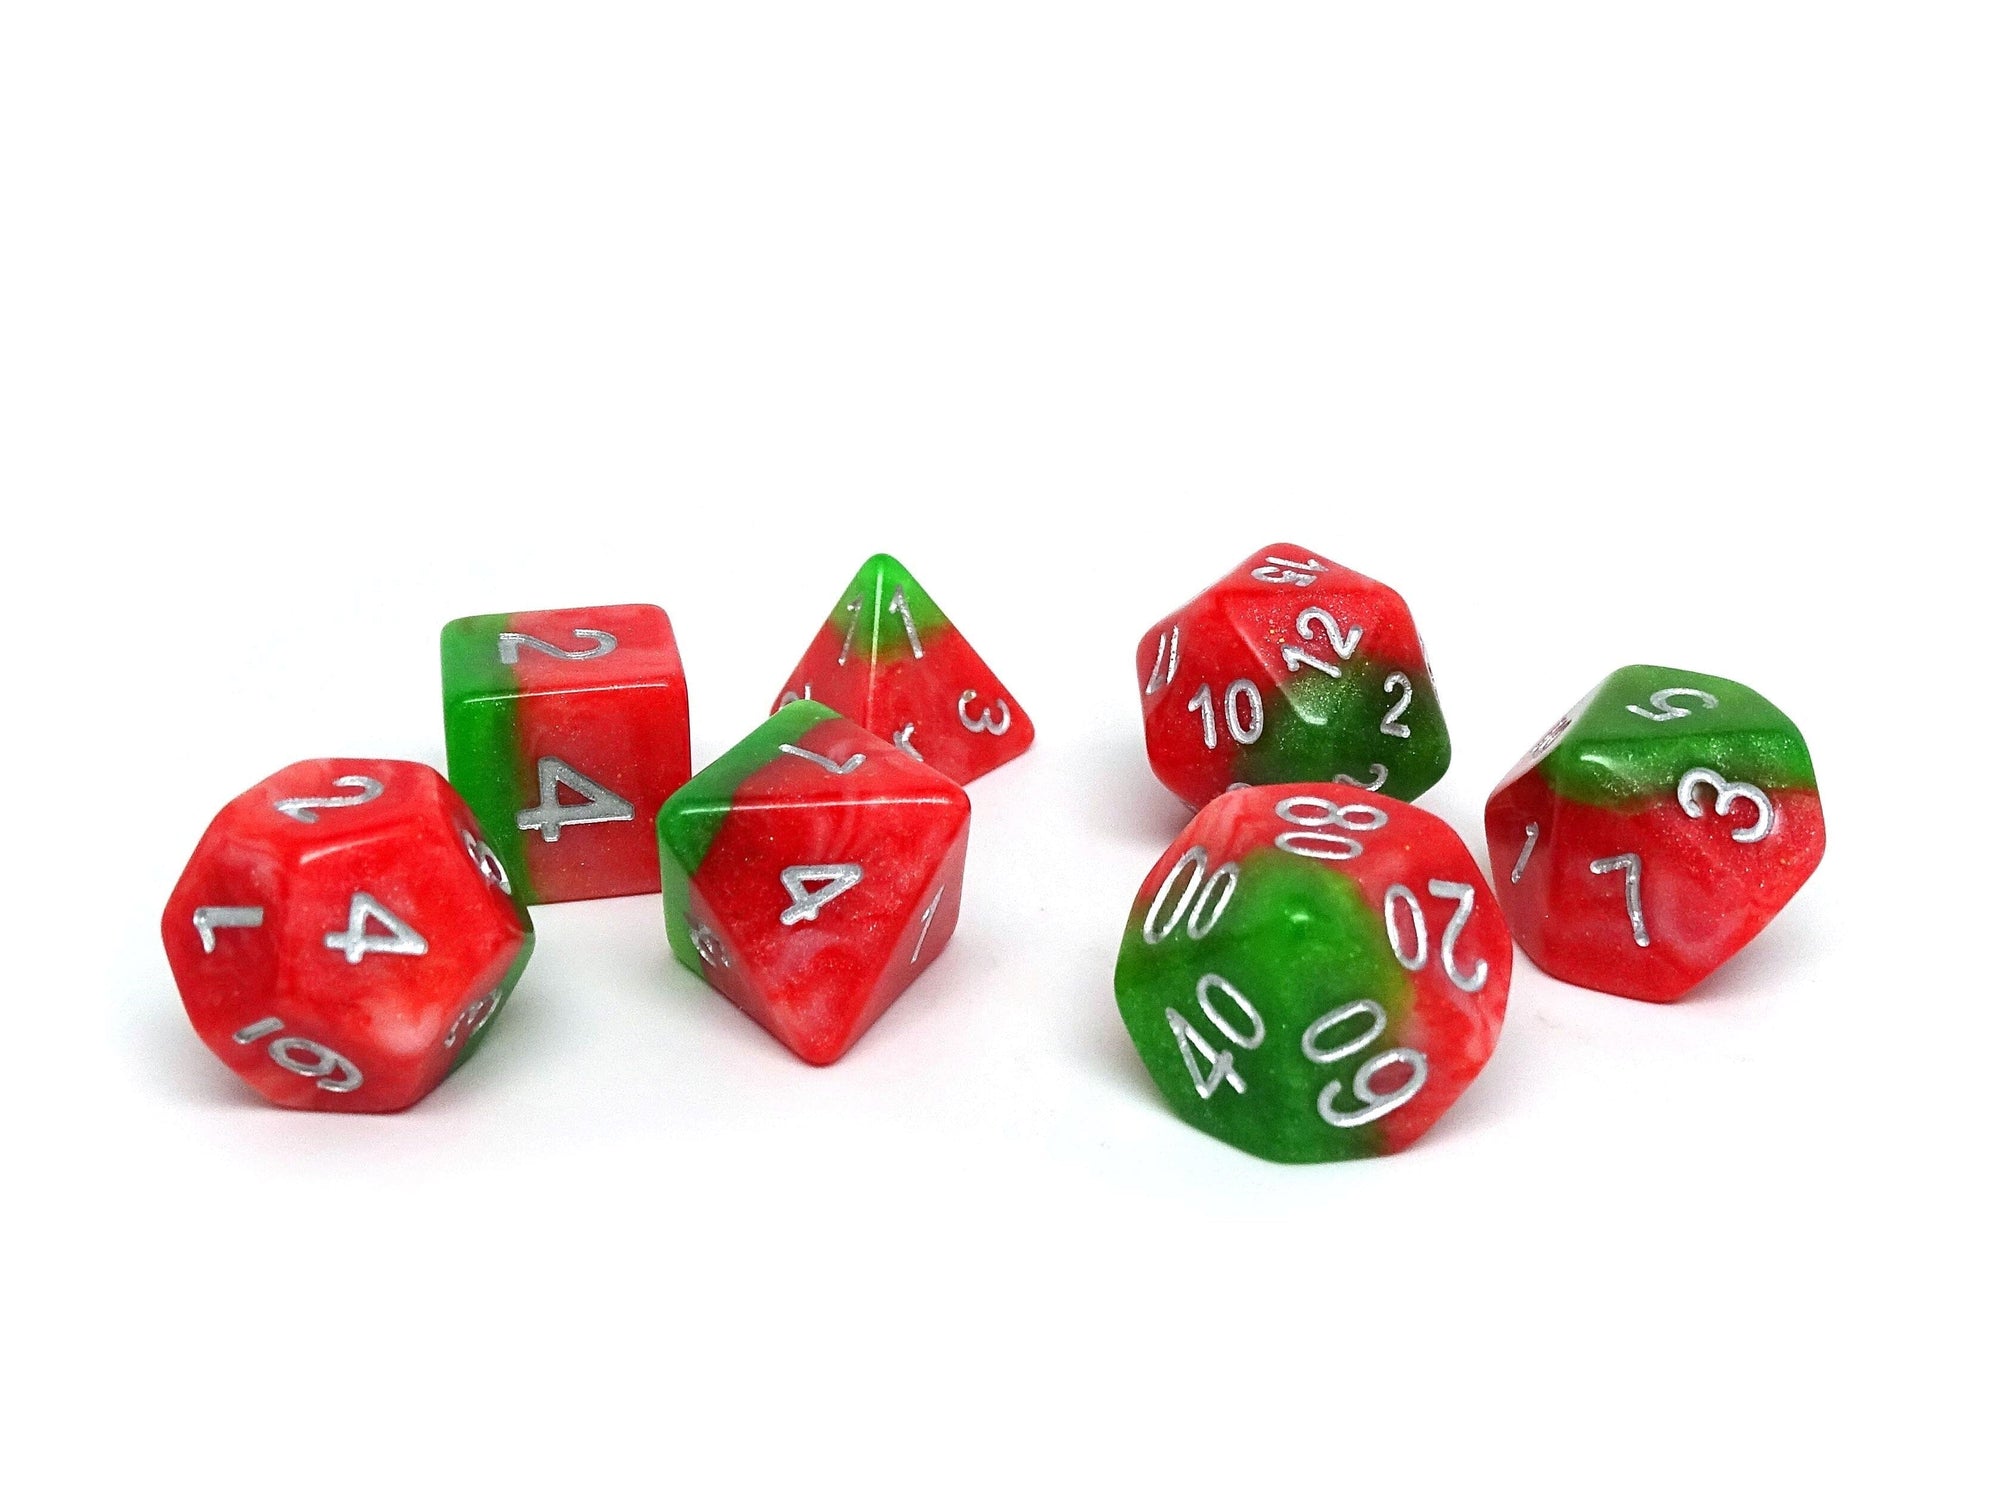 Red and Green Two Tone - 7 Piece Dice Collection